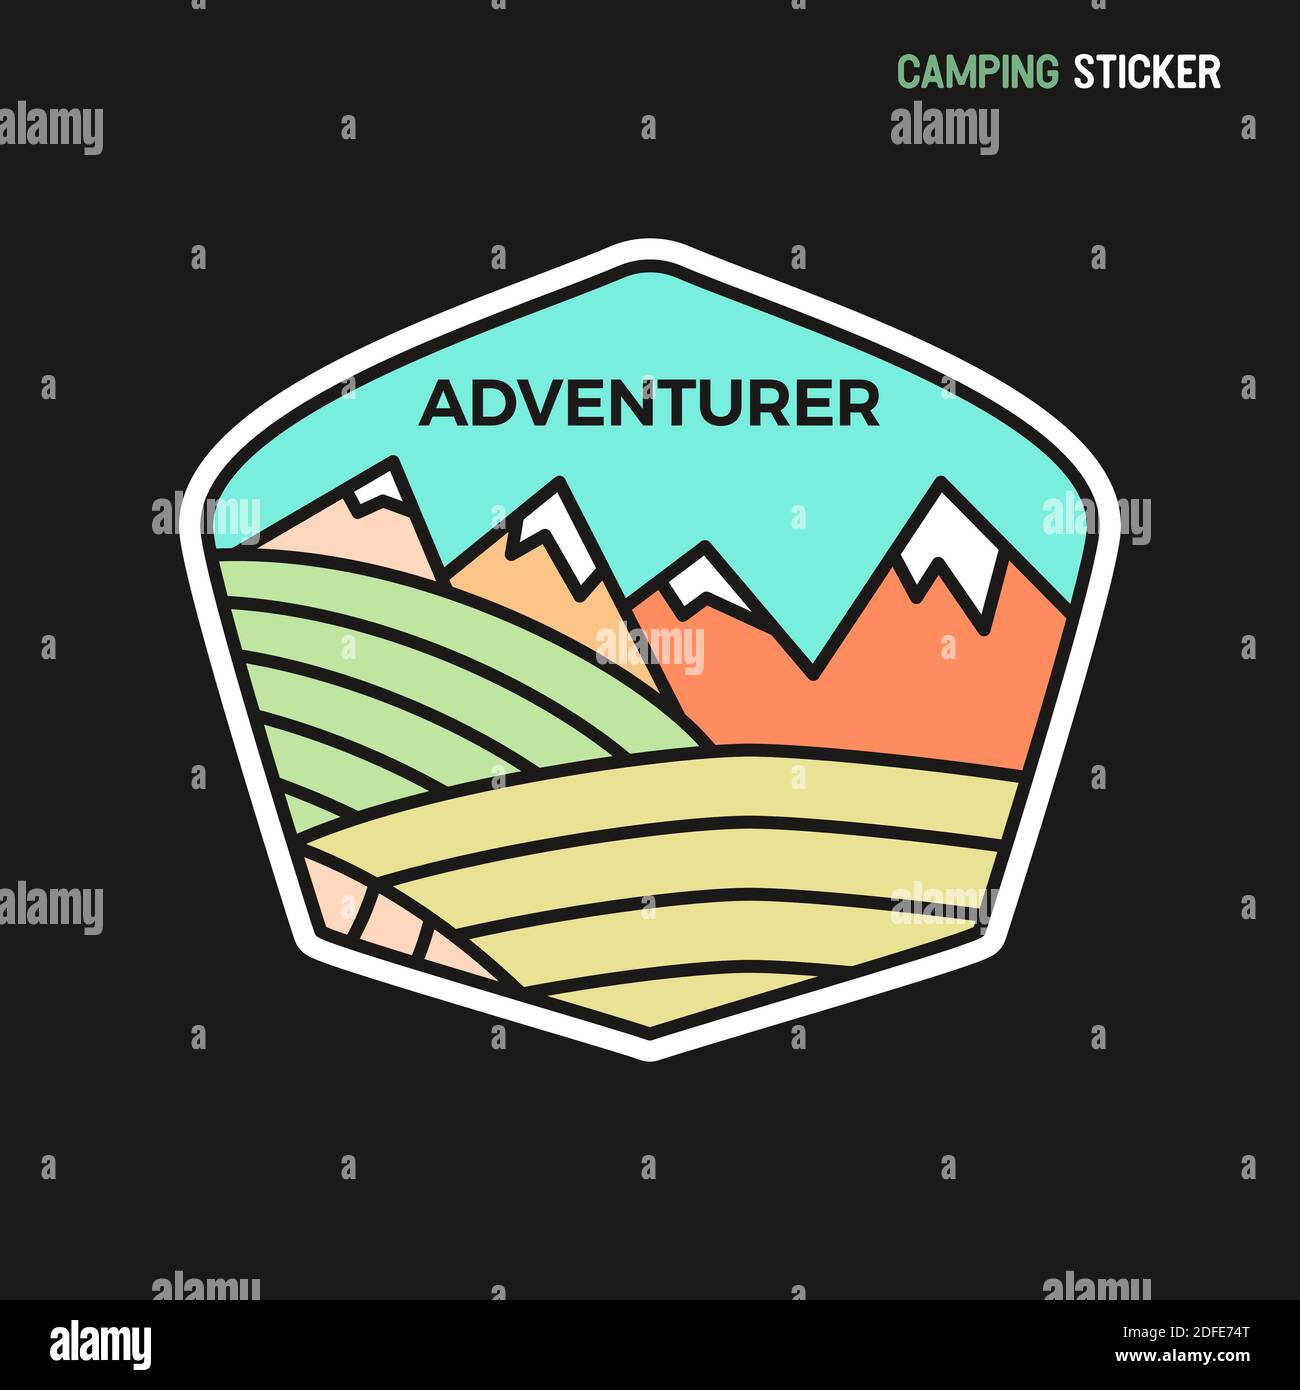 Camping adventure sticker design. Travel hand drawn patch. Adventurer label isolated. Stock vector Stock Vector